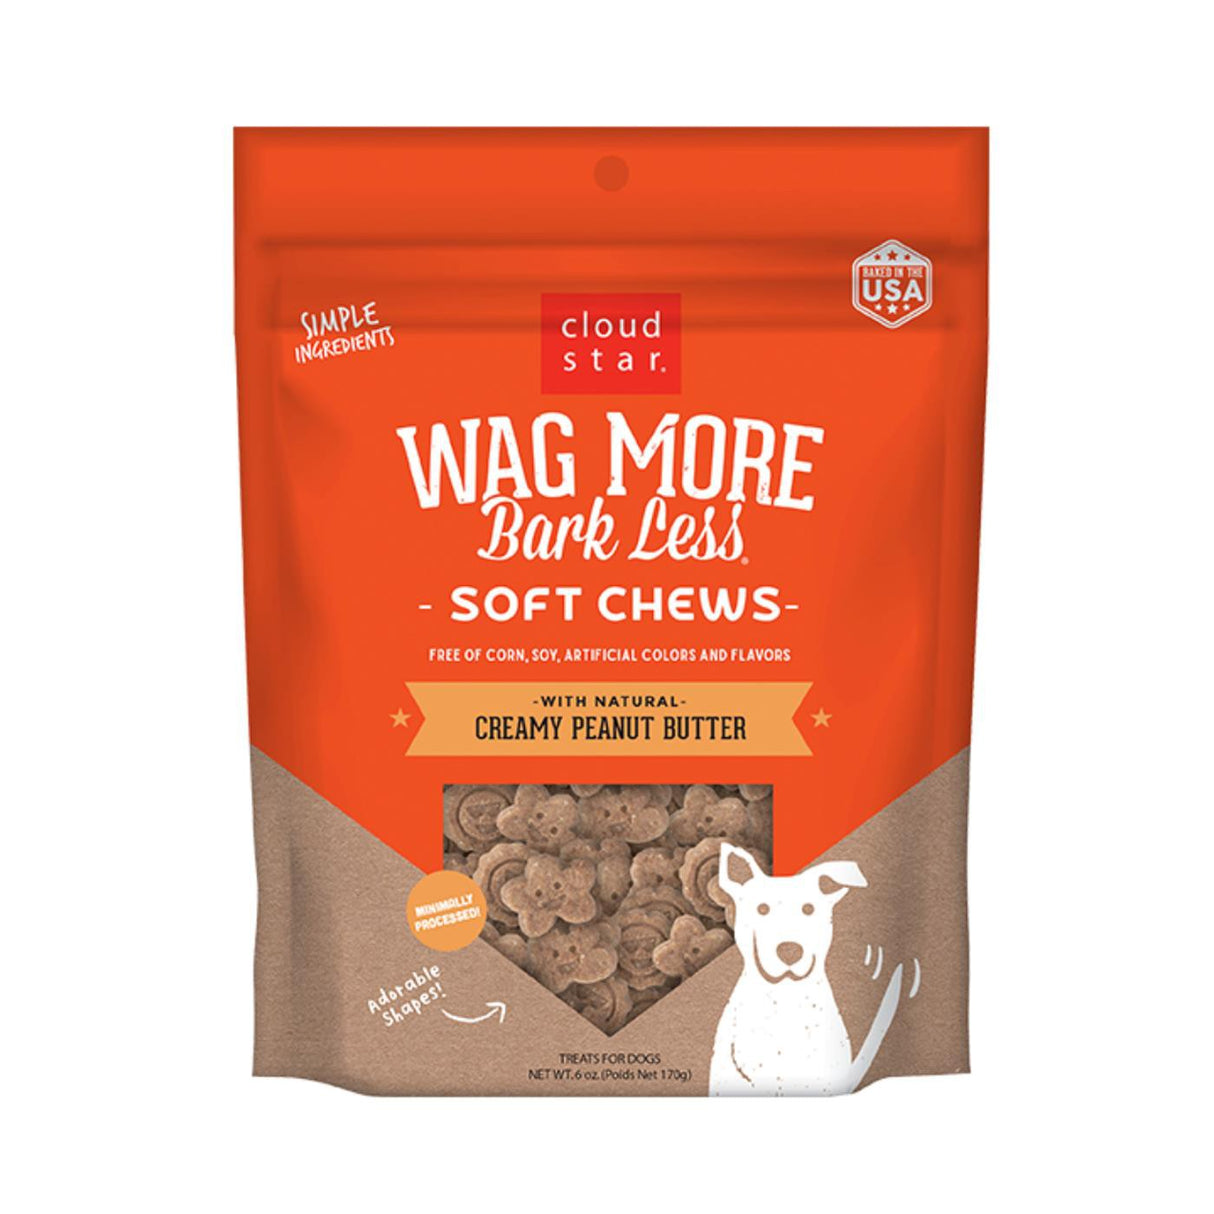 Cloud Star Wag More, Bark Less Soft & Chewy Creamy Peanut Butter 6 oz.